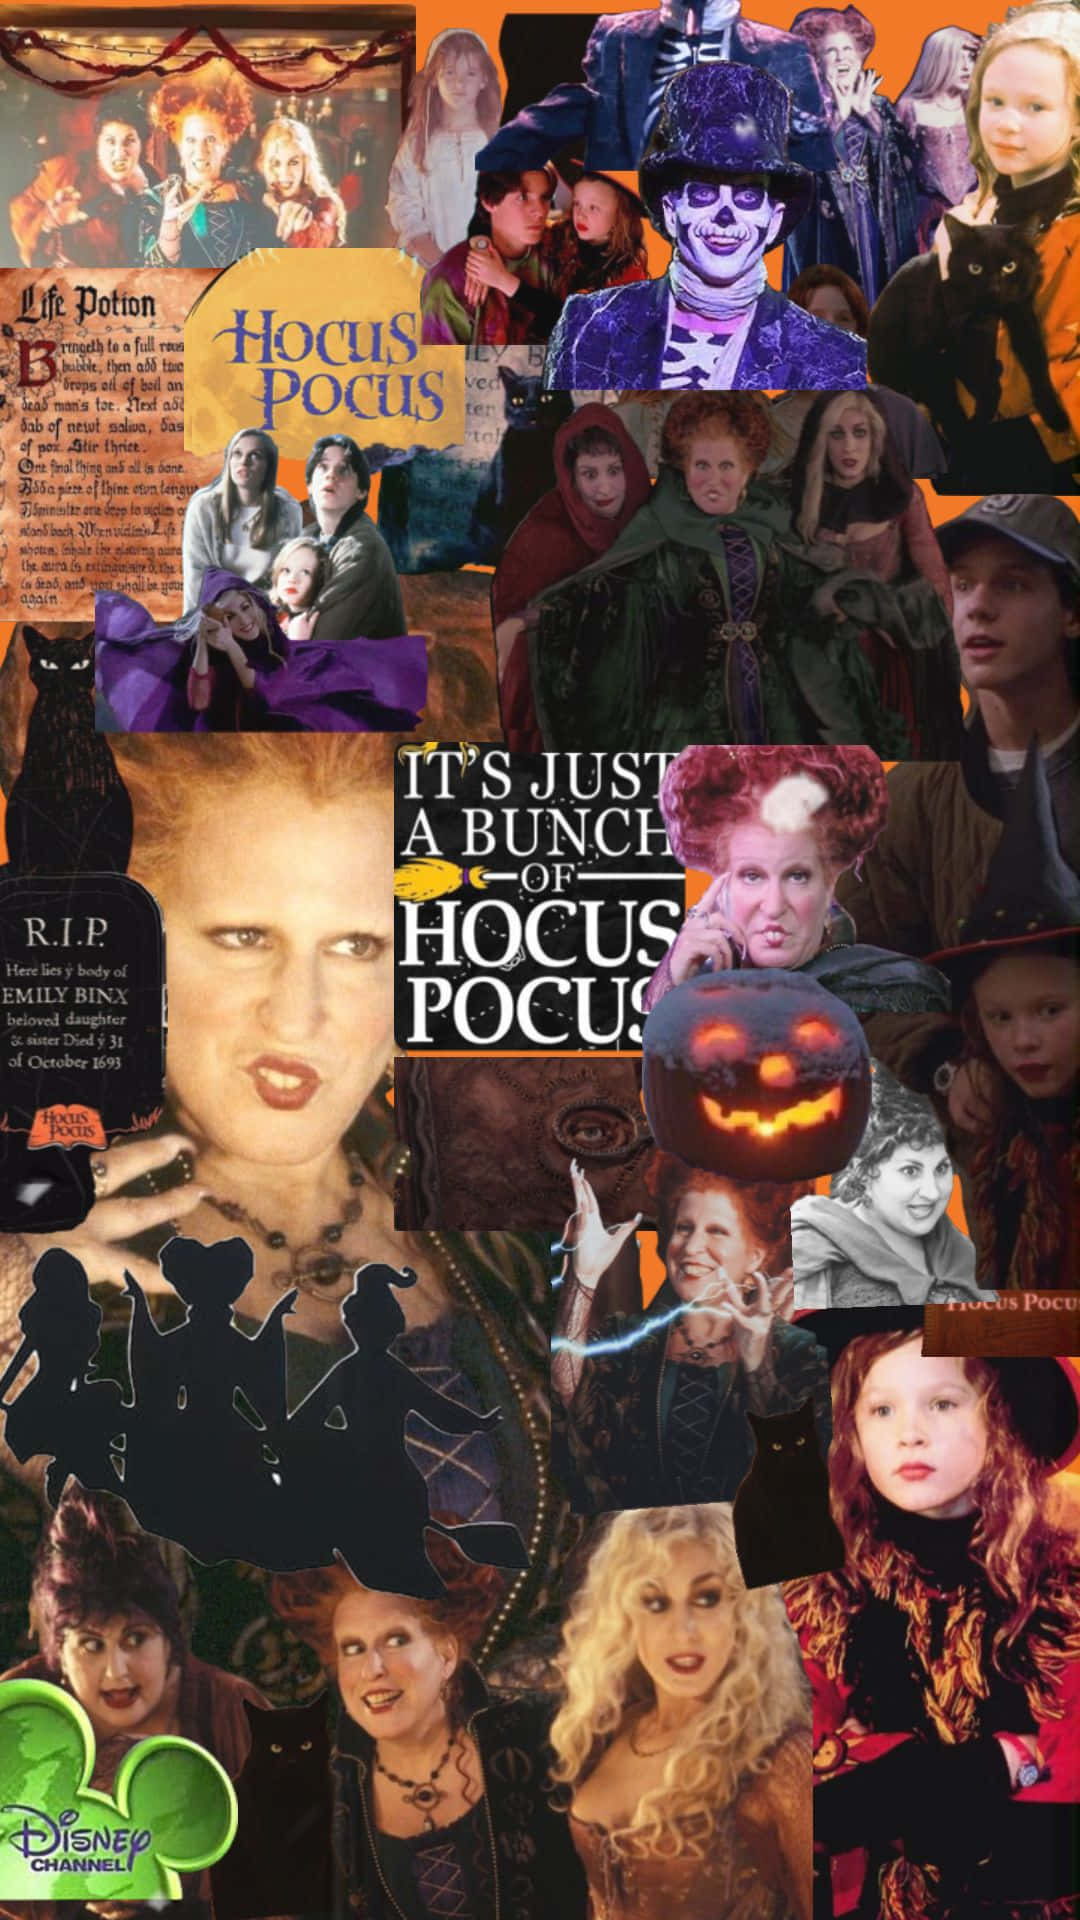 Enter the magical world of Hocus Pocus with this magical iPhone! Wallpaper